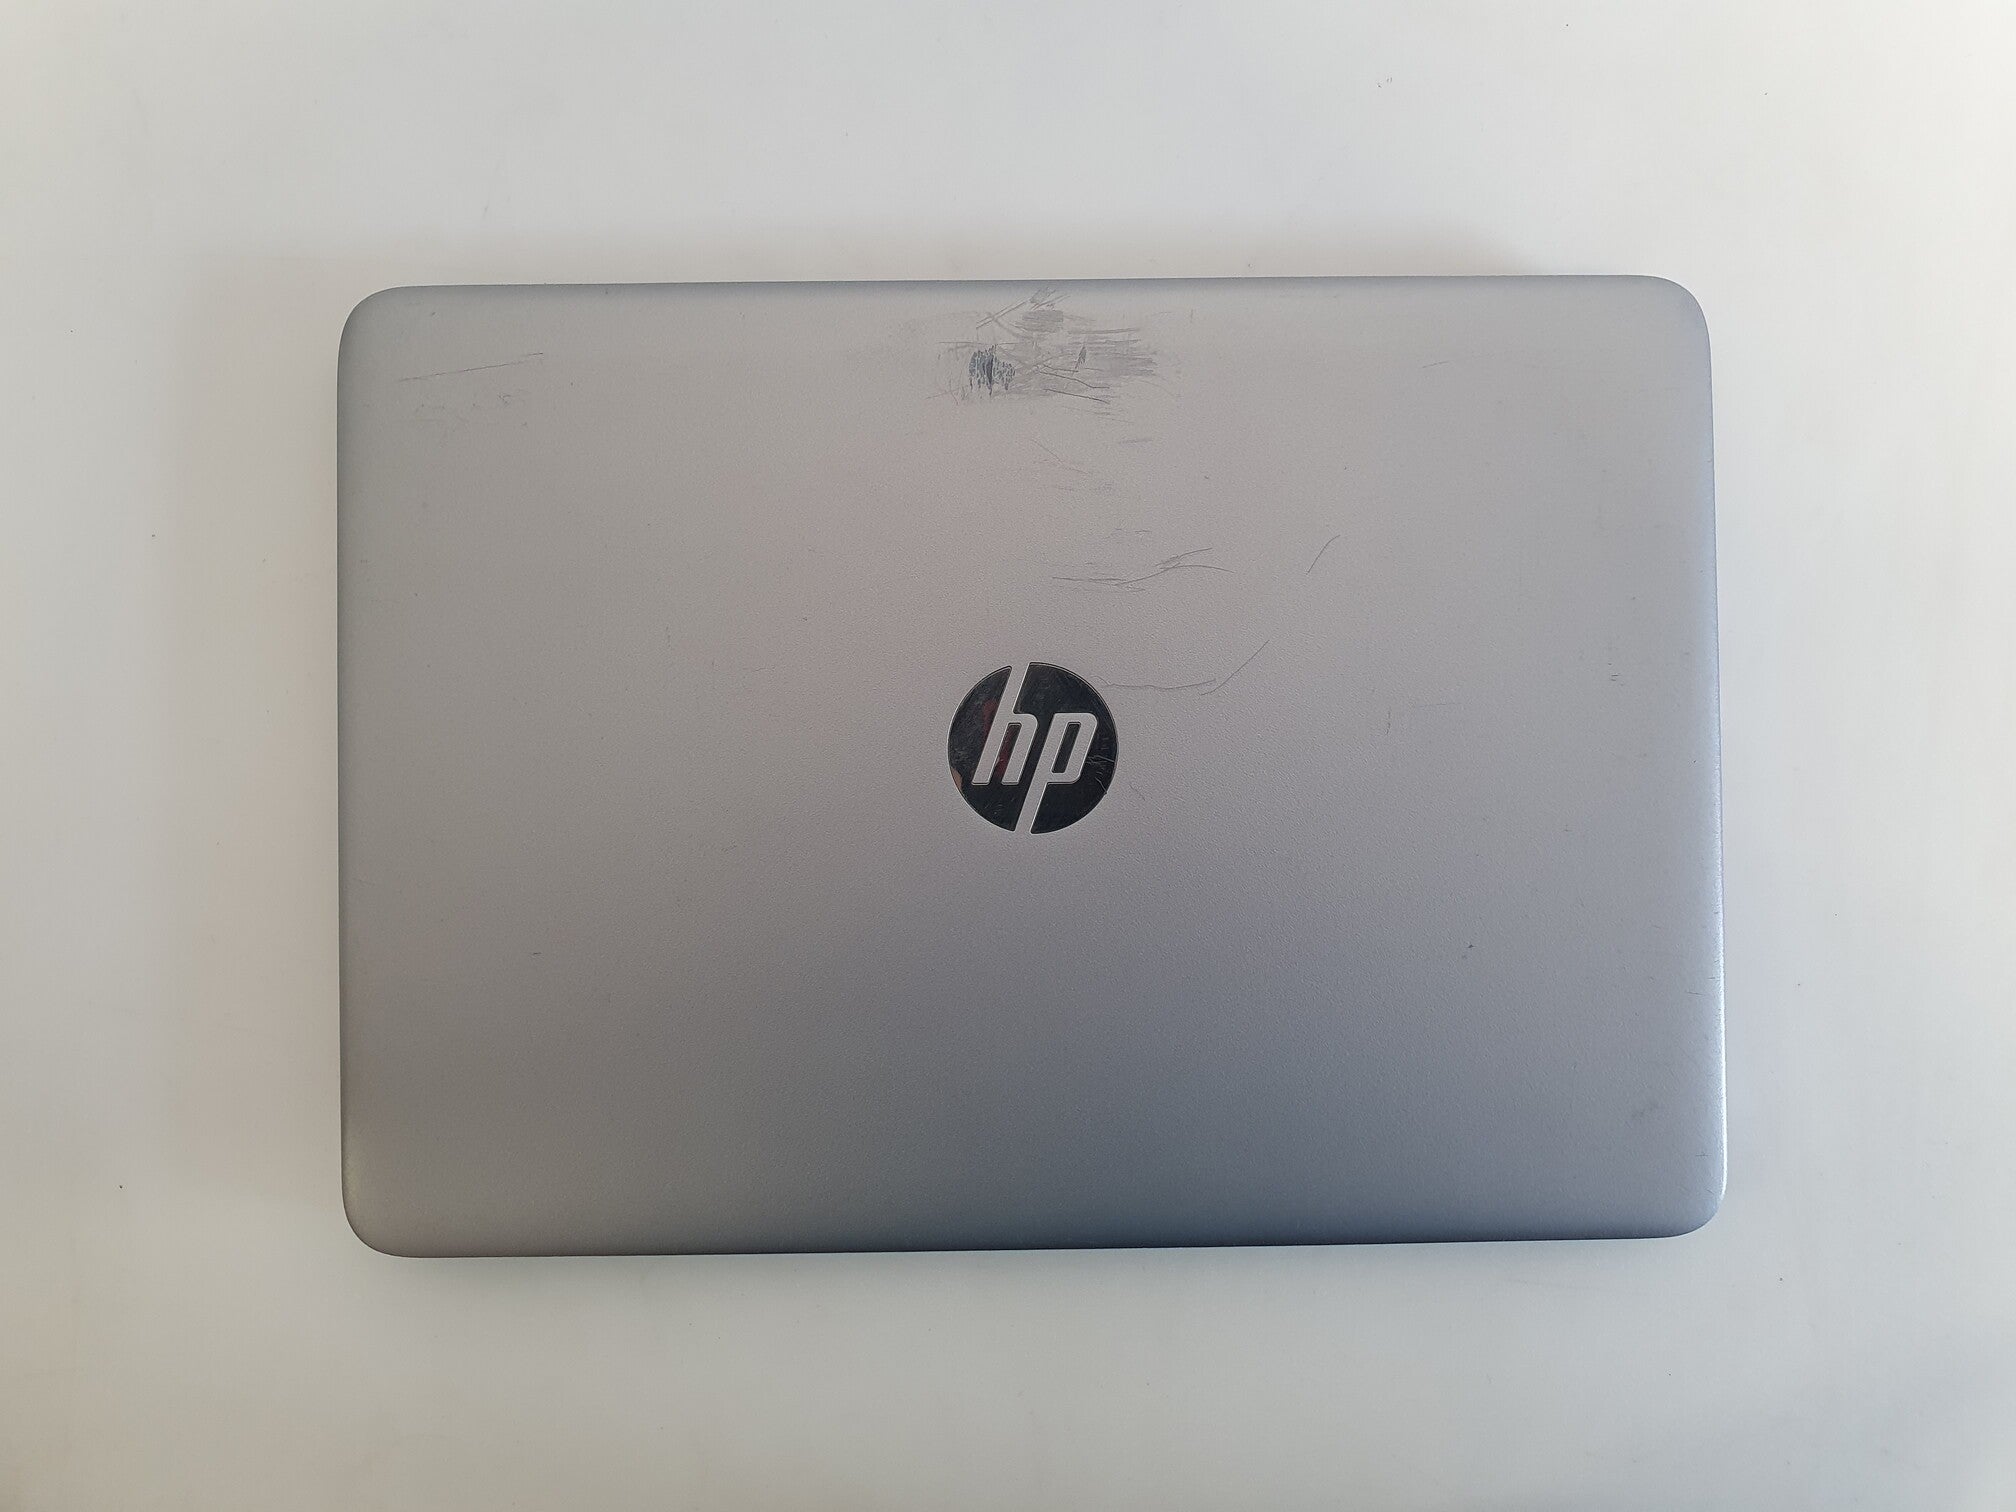 HP ProBook 4330s laptop /13.3 inches / i3, 4 GB, 250 GB HDD, Win 10